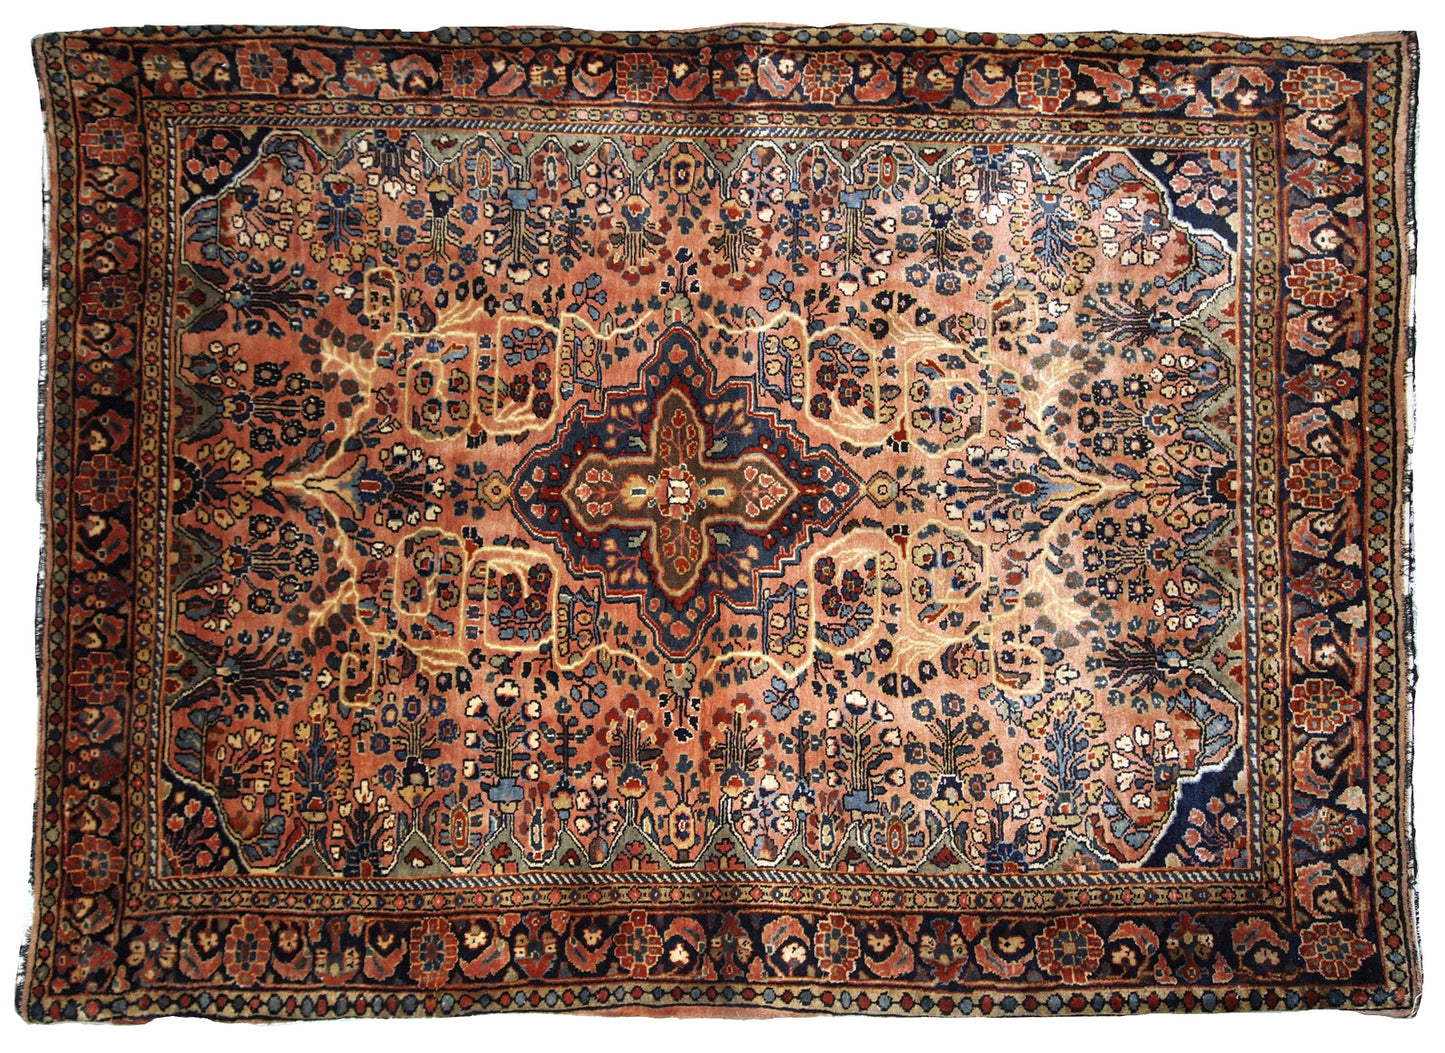 Antique hand made Persian Sarouk rug in peach shades. The rug is from the beginning of 20th century in original good condition.